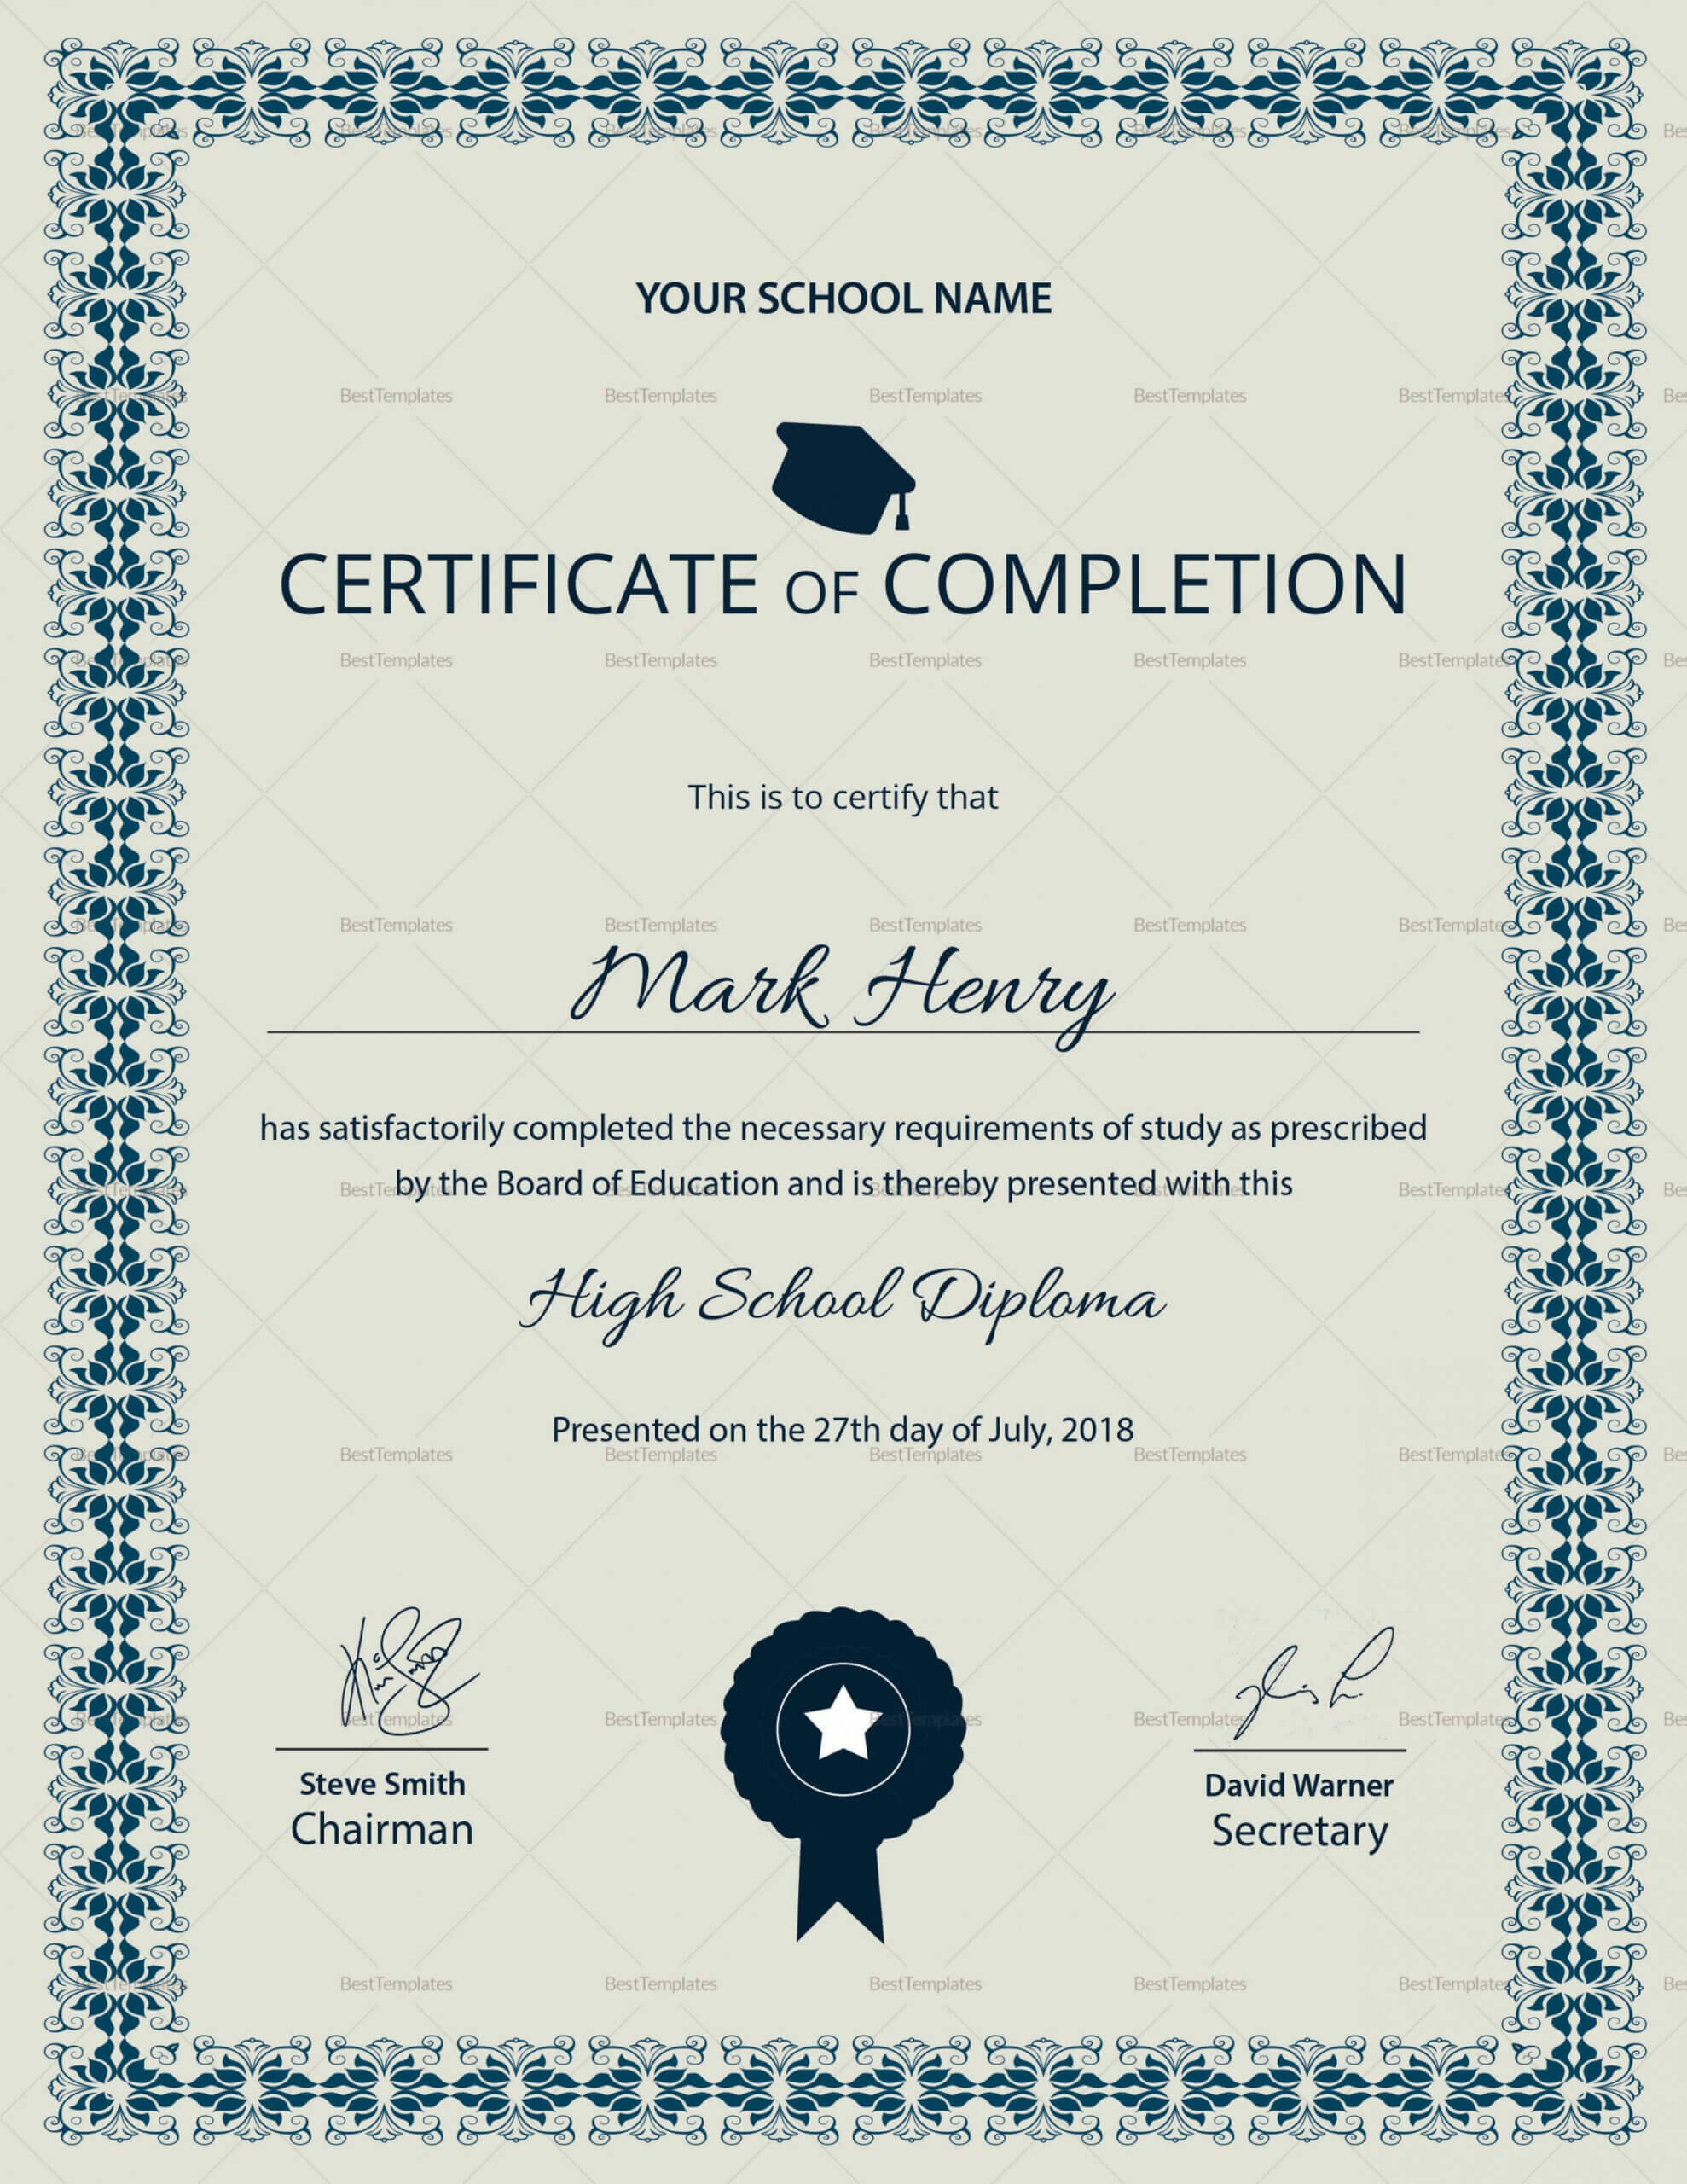 Editable High School Diploma Completion Certificate Design In Certificate Templates For School